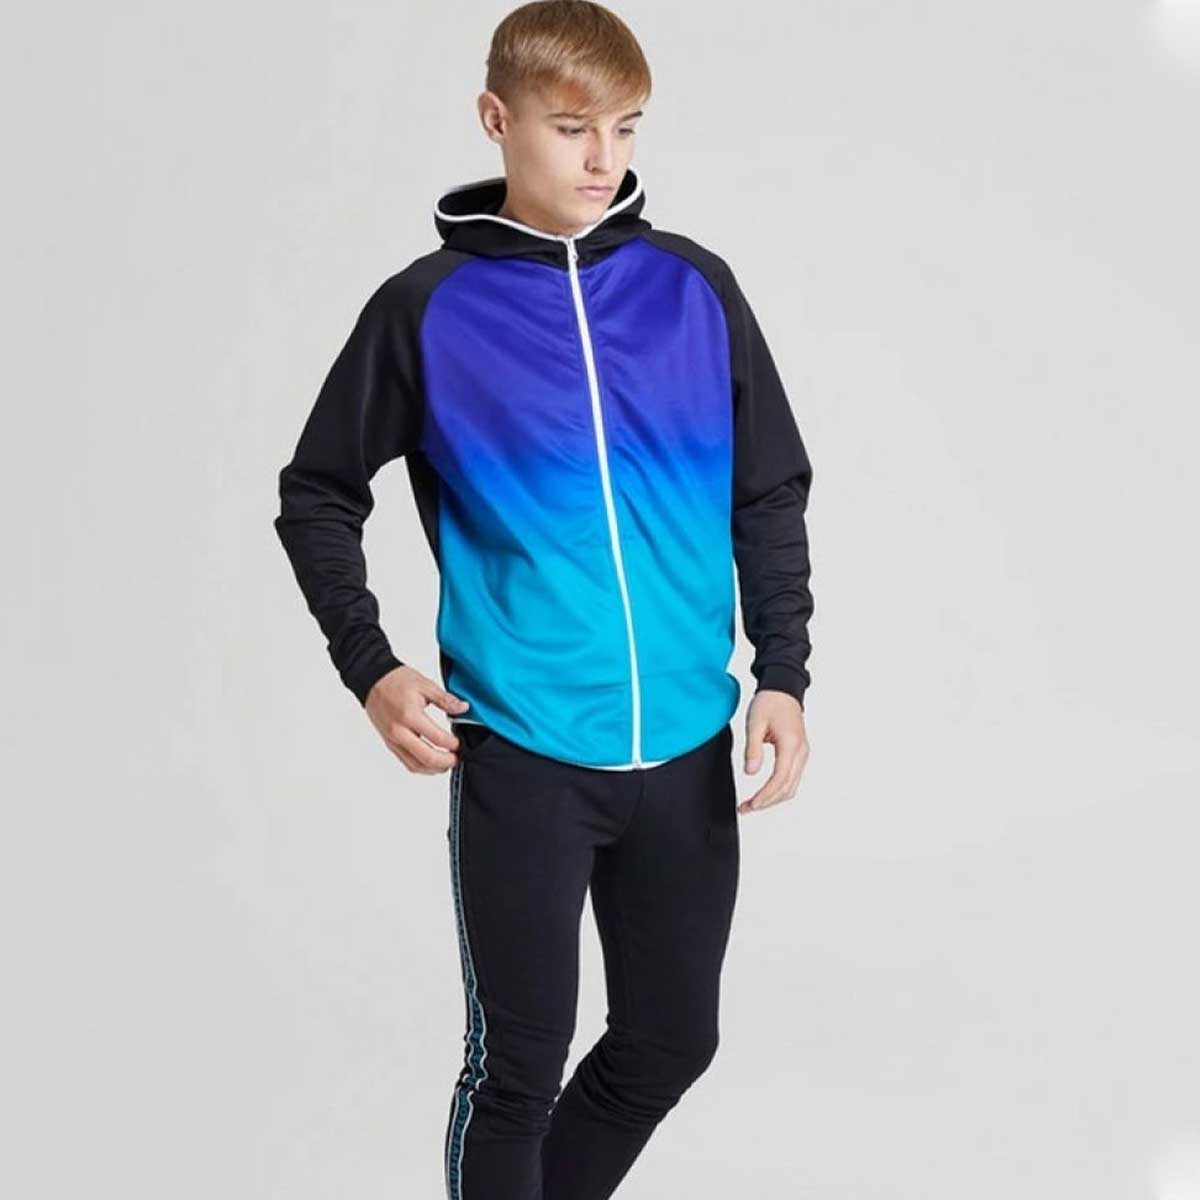 Sublimation Fleece Hoodies Manufacturers in Abbotsford